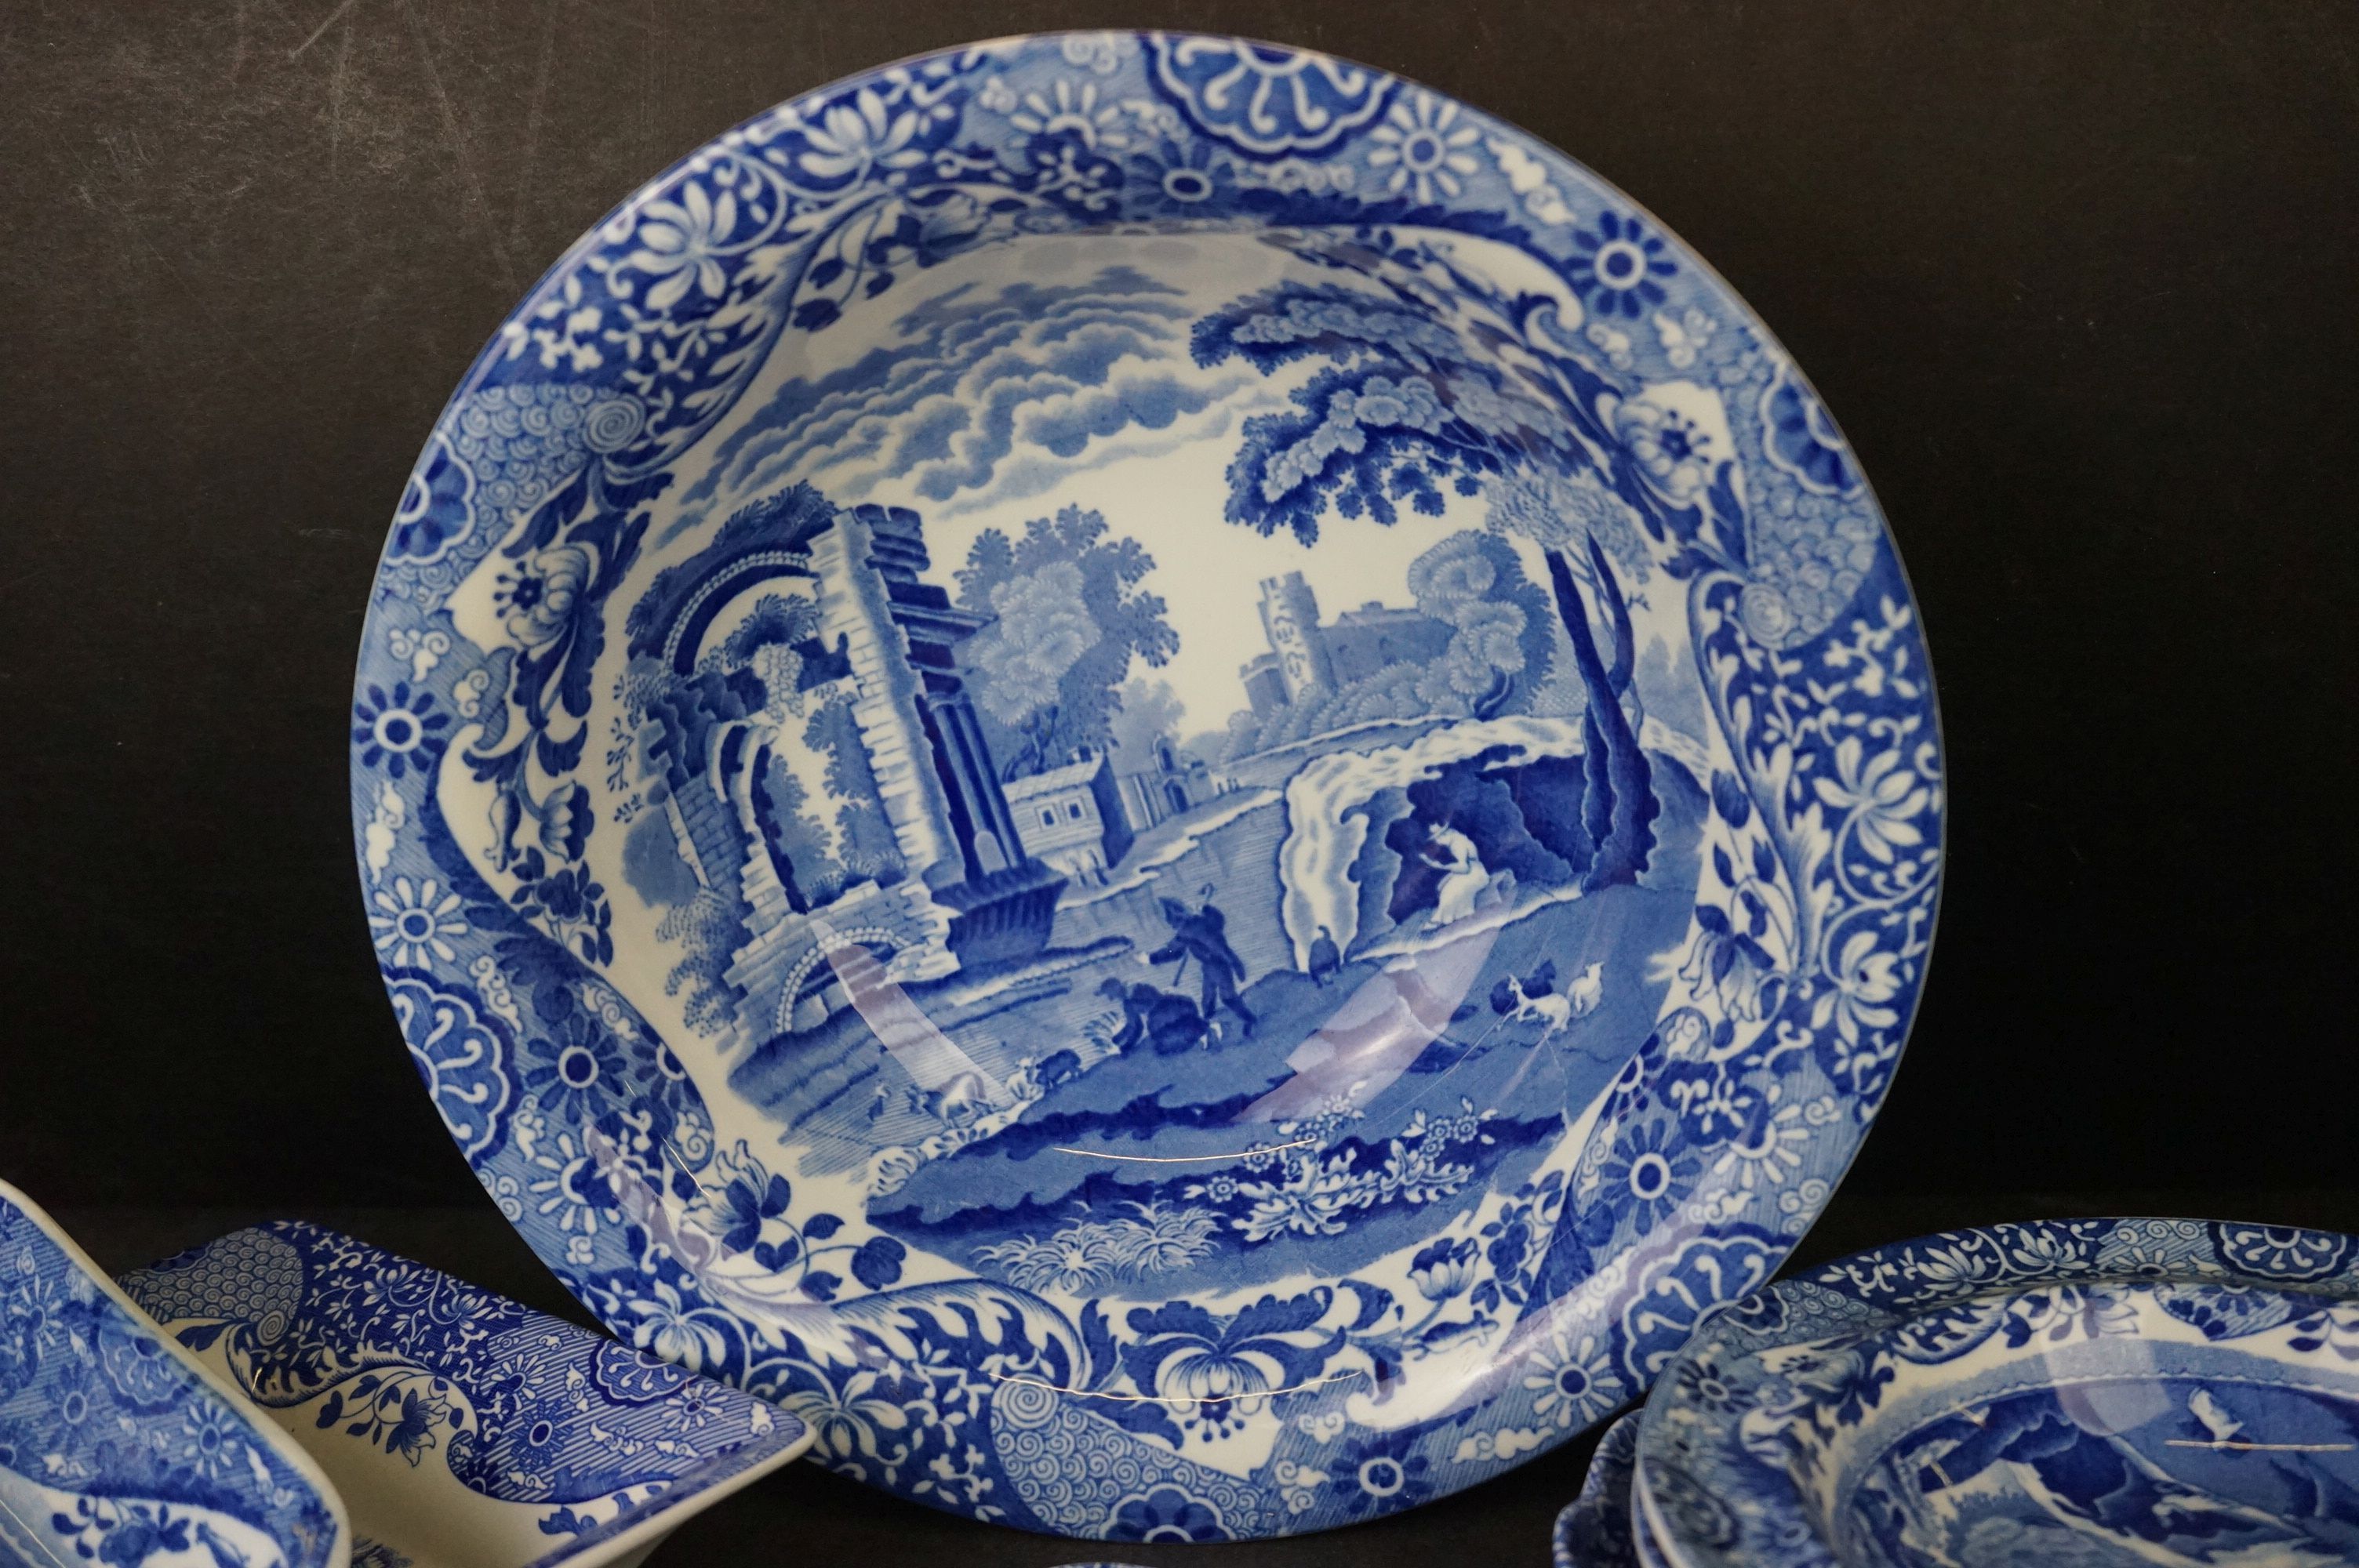 Collection of Spode Italian Blue and Ceramics including Bowl, Two Cups and Saucers, Two Tea Plates - Image 5 of 9